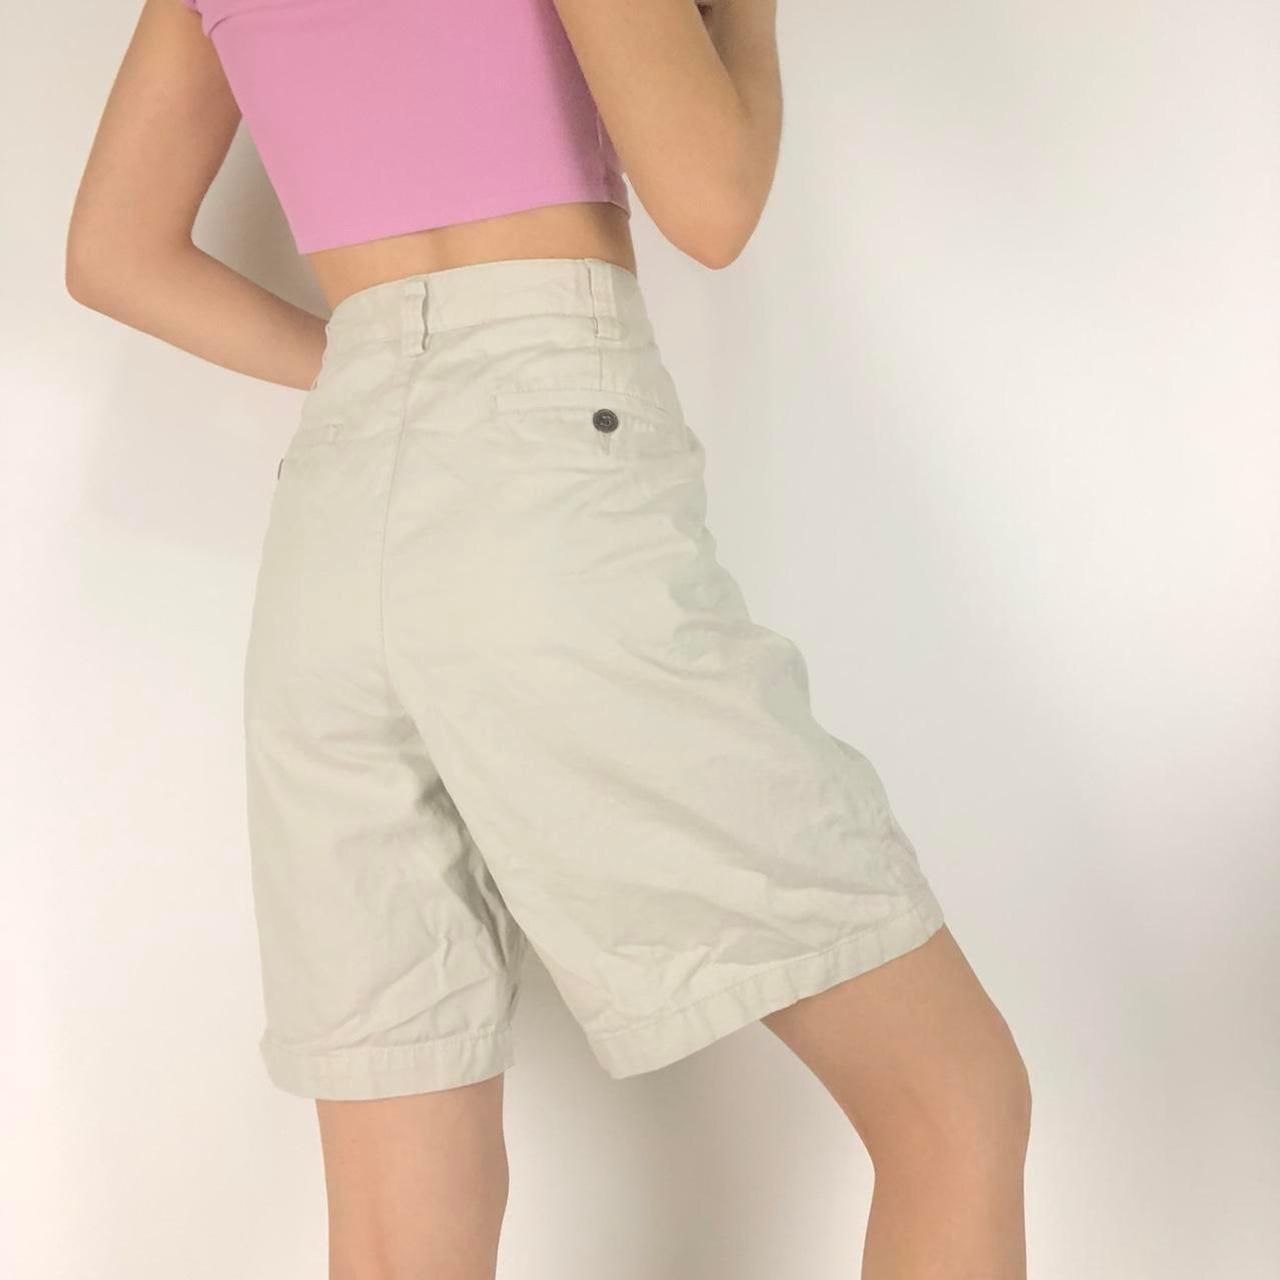 Product Image 2 - High waisted beige long shorts

These